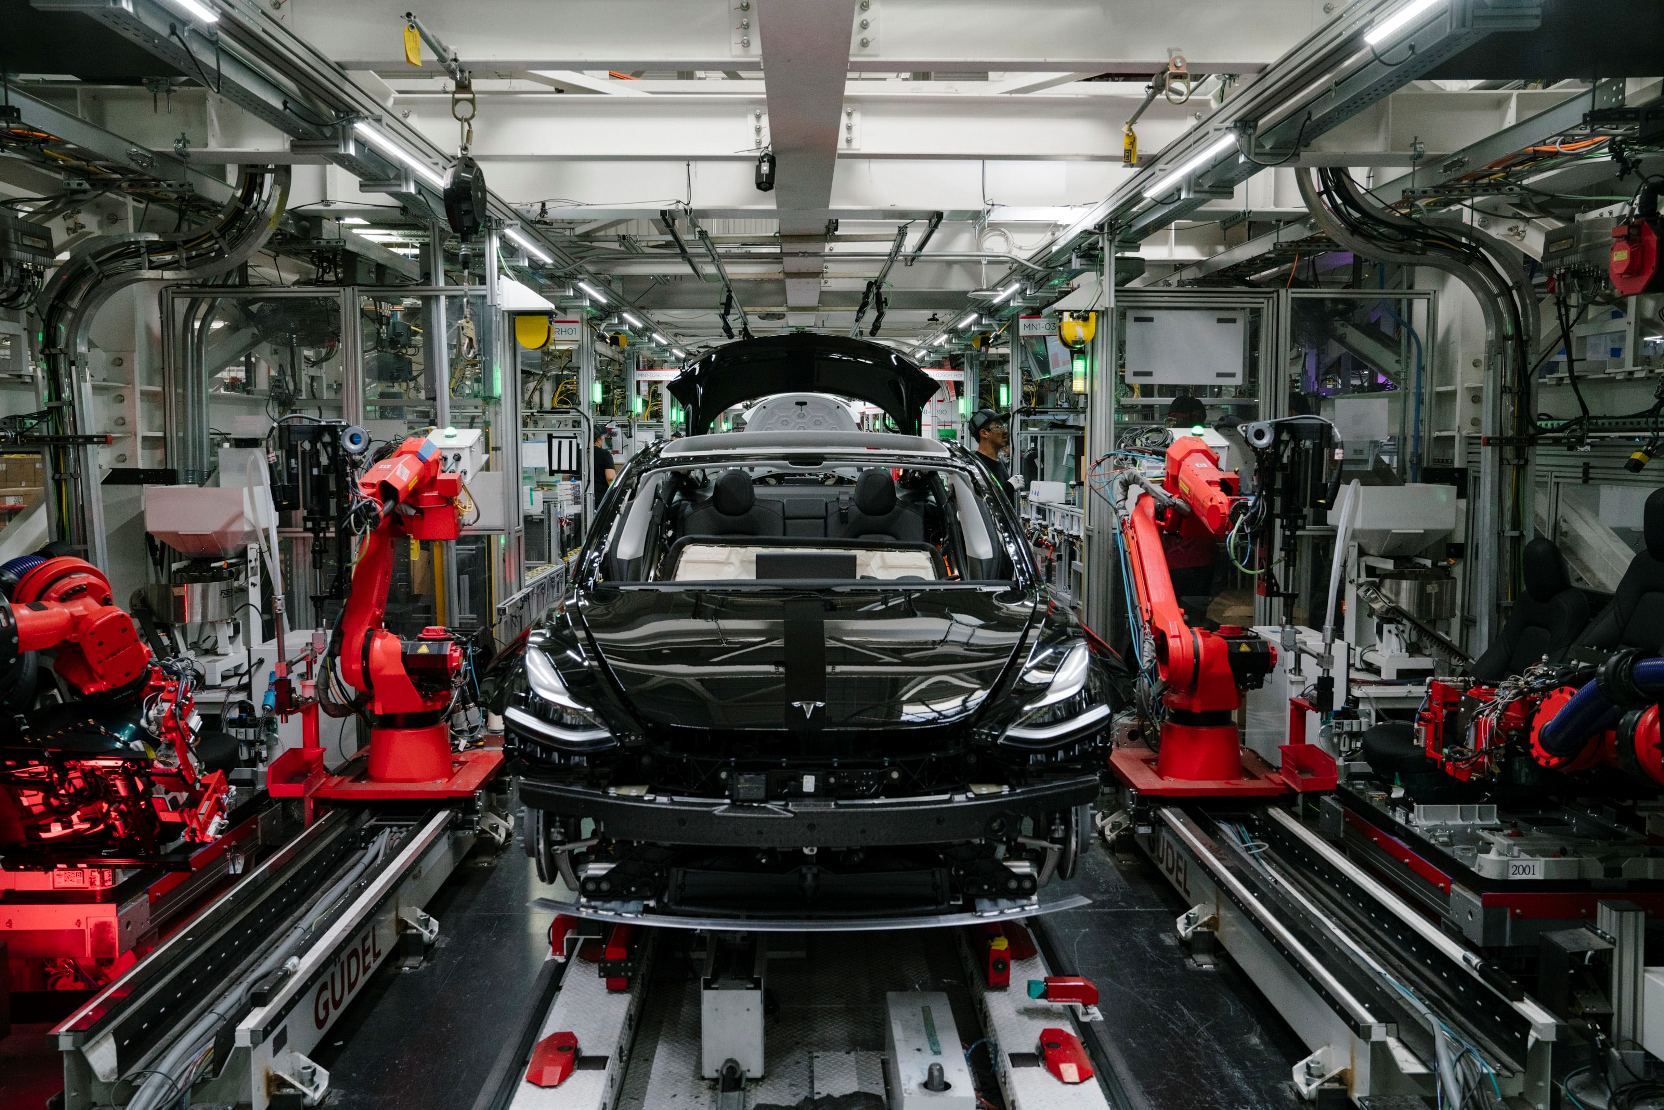 Tesla's Q3 Report Exceeded Analysts' Expectations, but Its Stock Still Fell About 3% in the Latest Trading